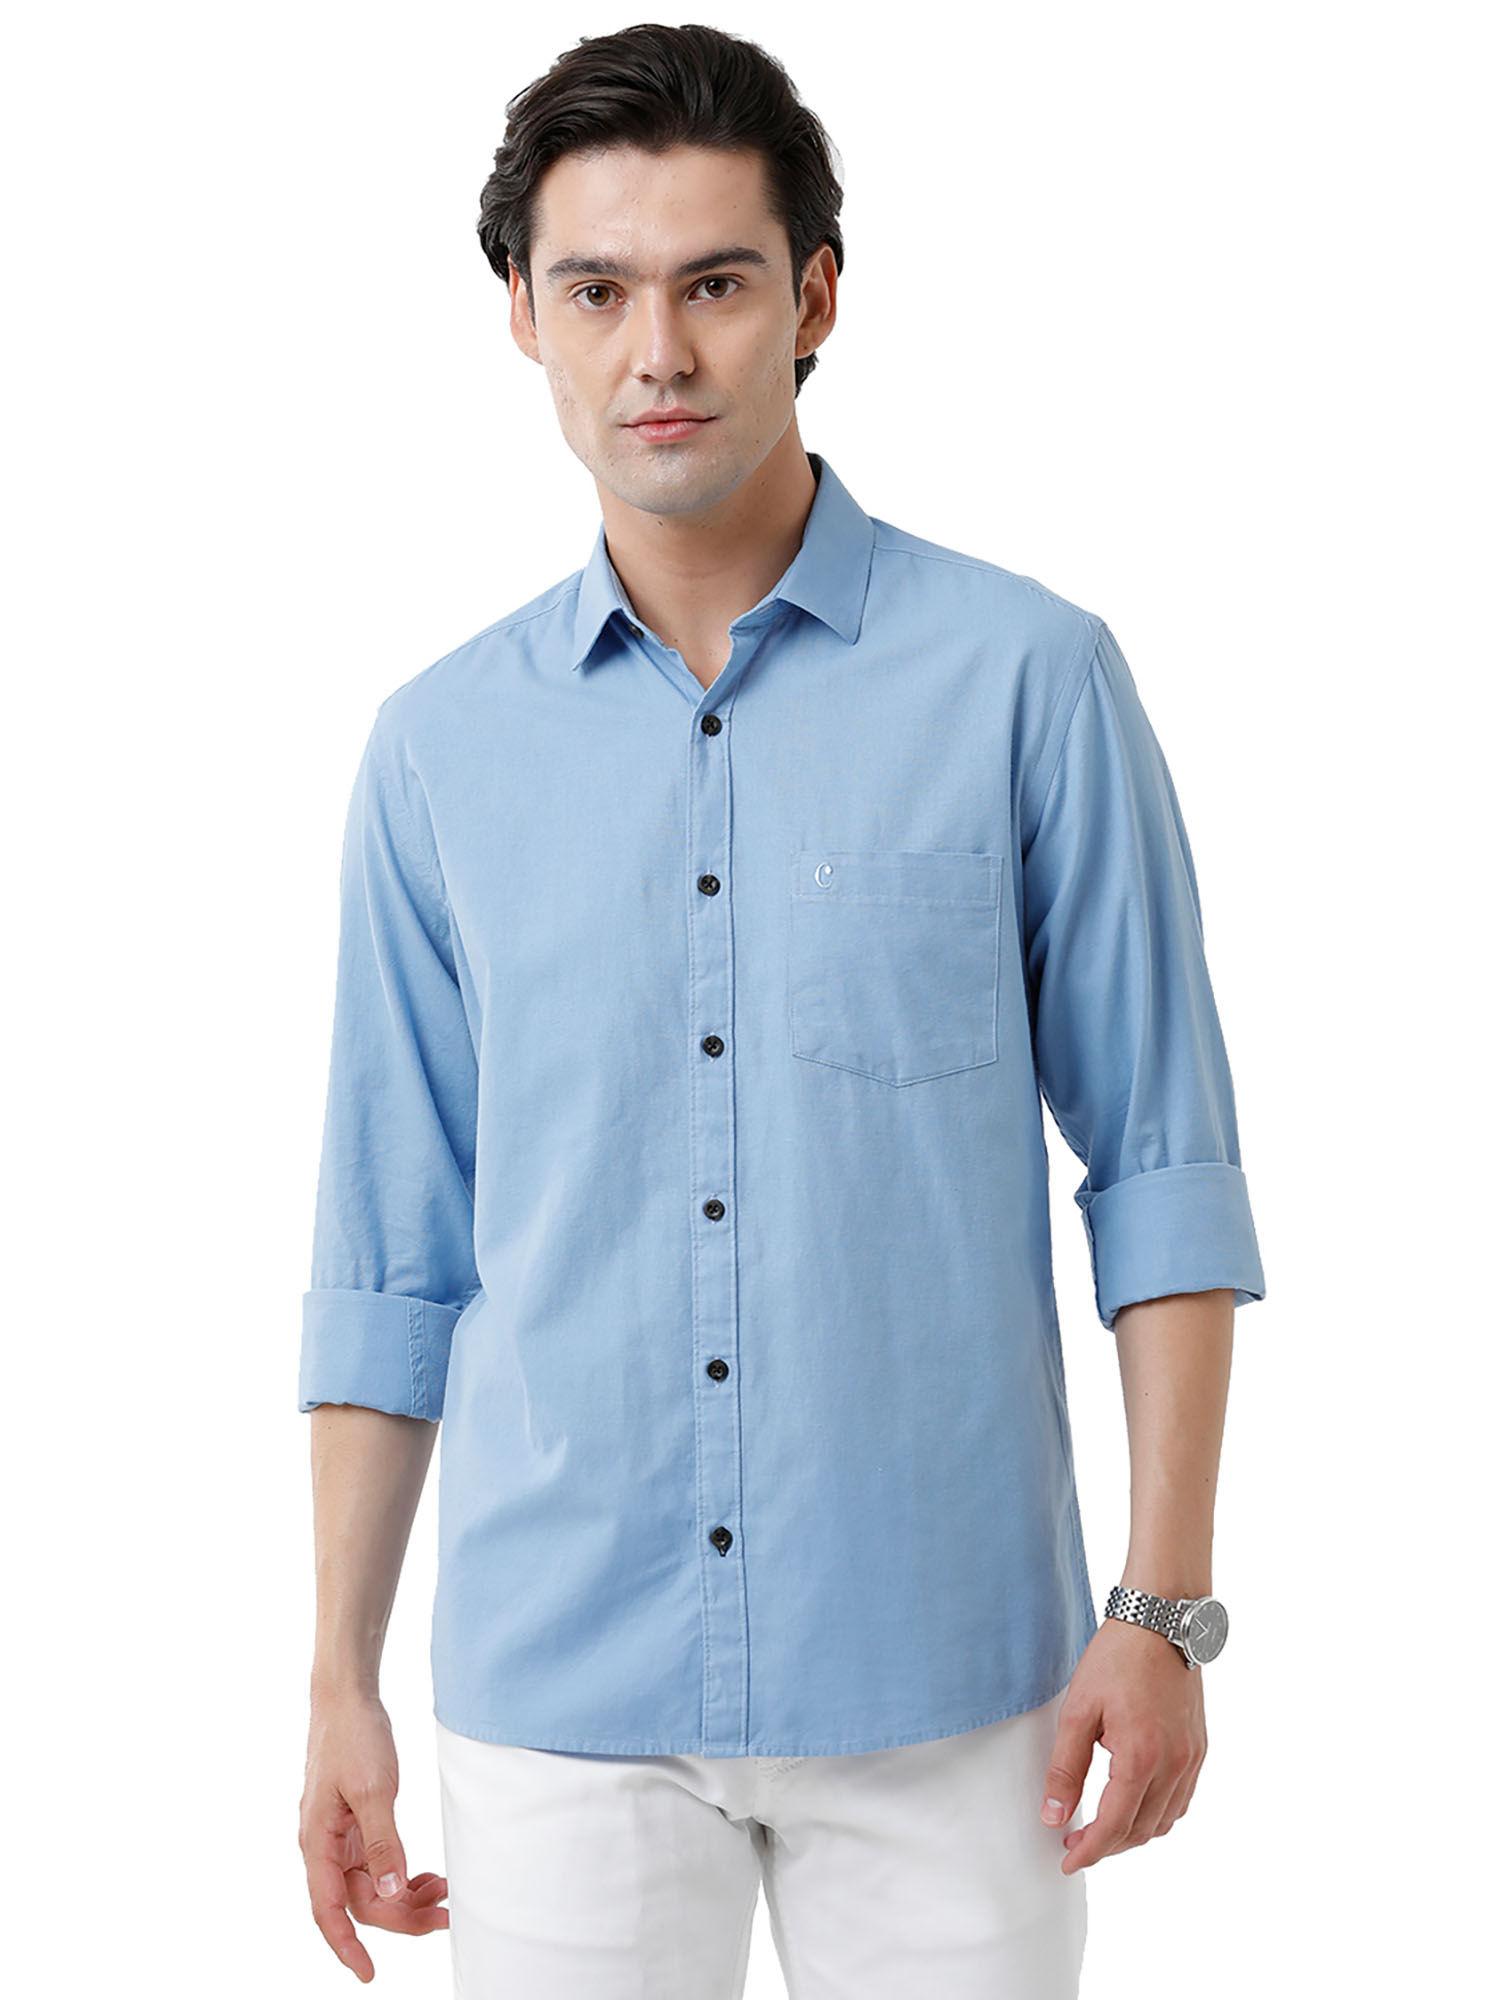 men's-cotton-linen-blue-solid-slim-fit-full-sleeve-casual-shirt